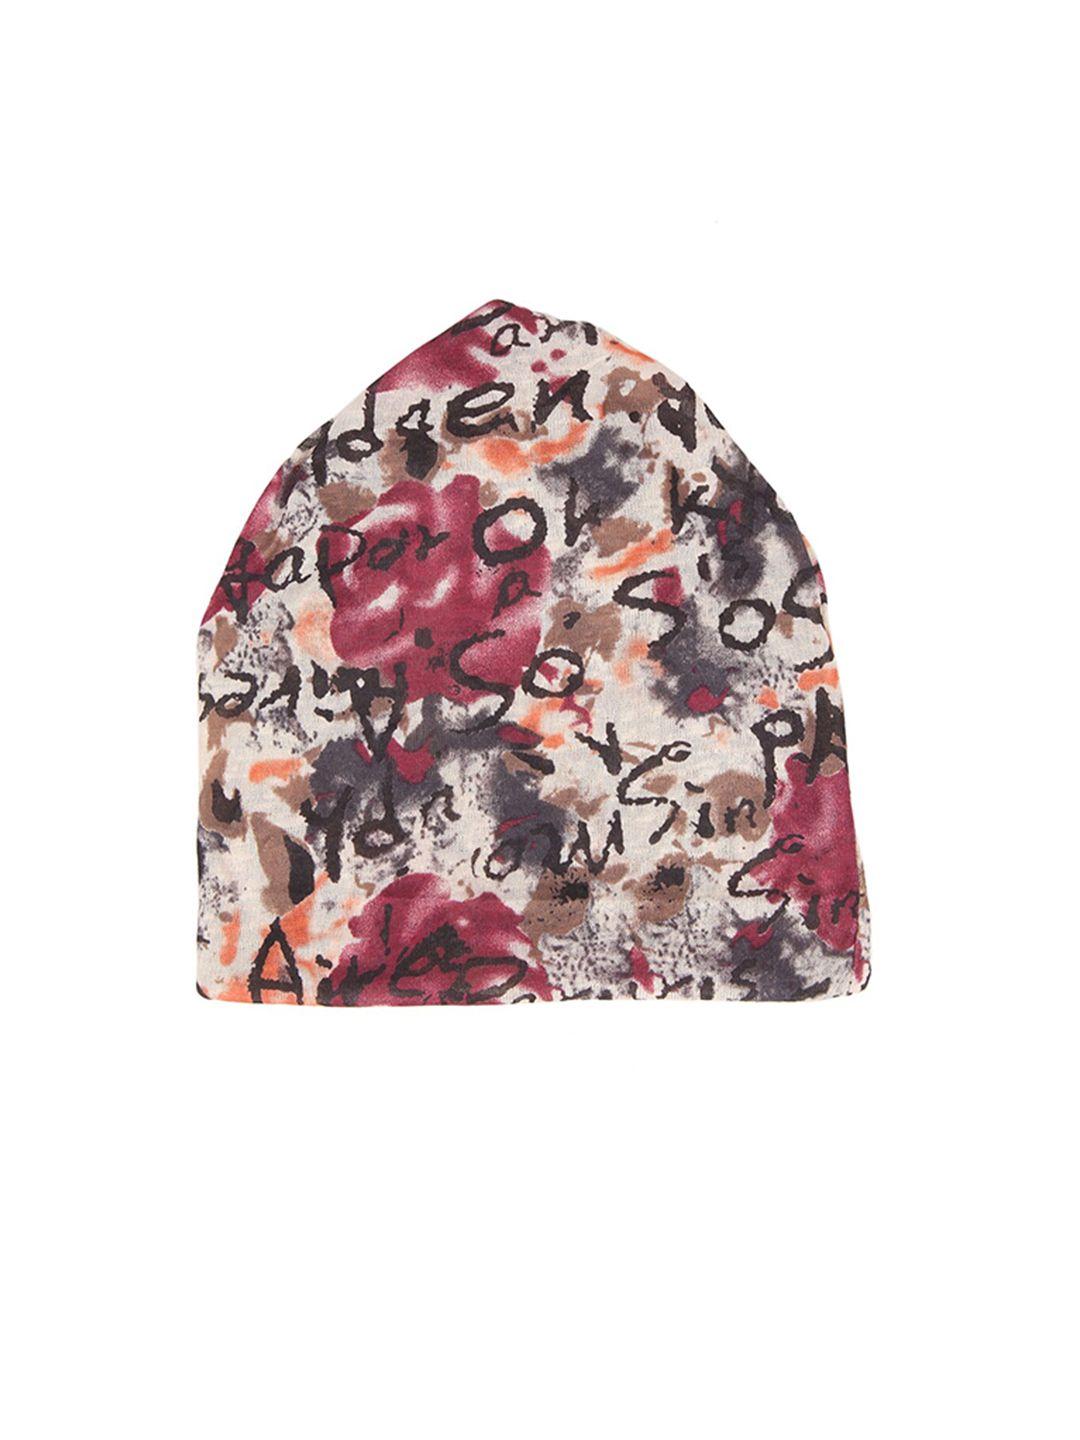 isweven unisex white & black printed beanie